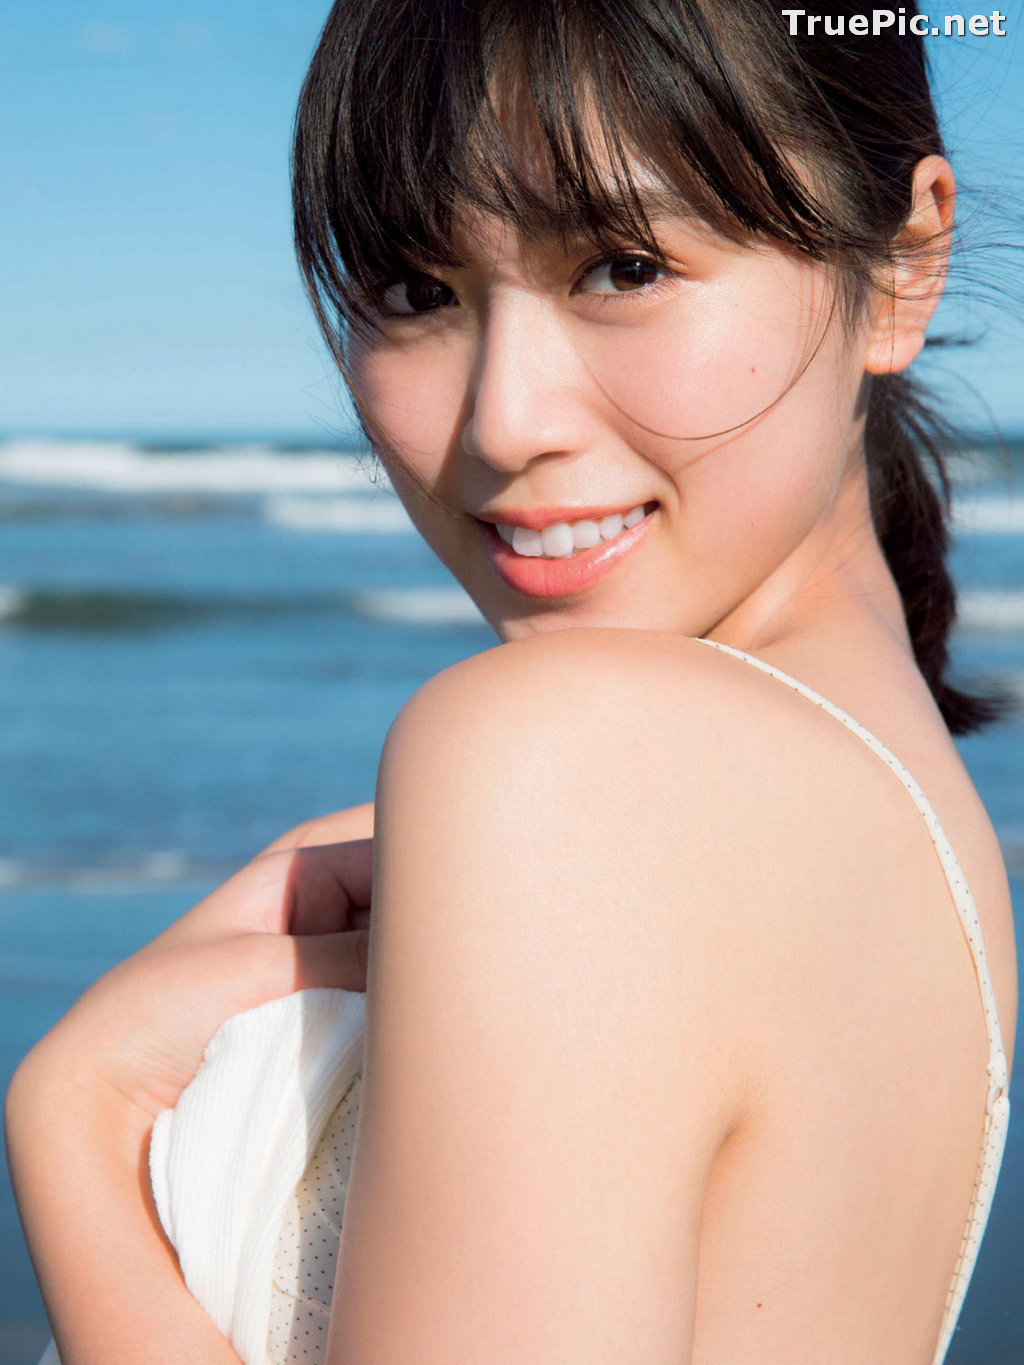 ImageJapanese Gravure Idol and Actress - Kitamuki Miyu (北向珠夕) - Sexy Picture Collection 2020 - TruePic.net - Picture-160